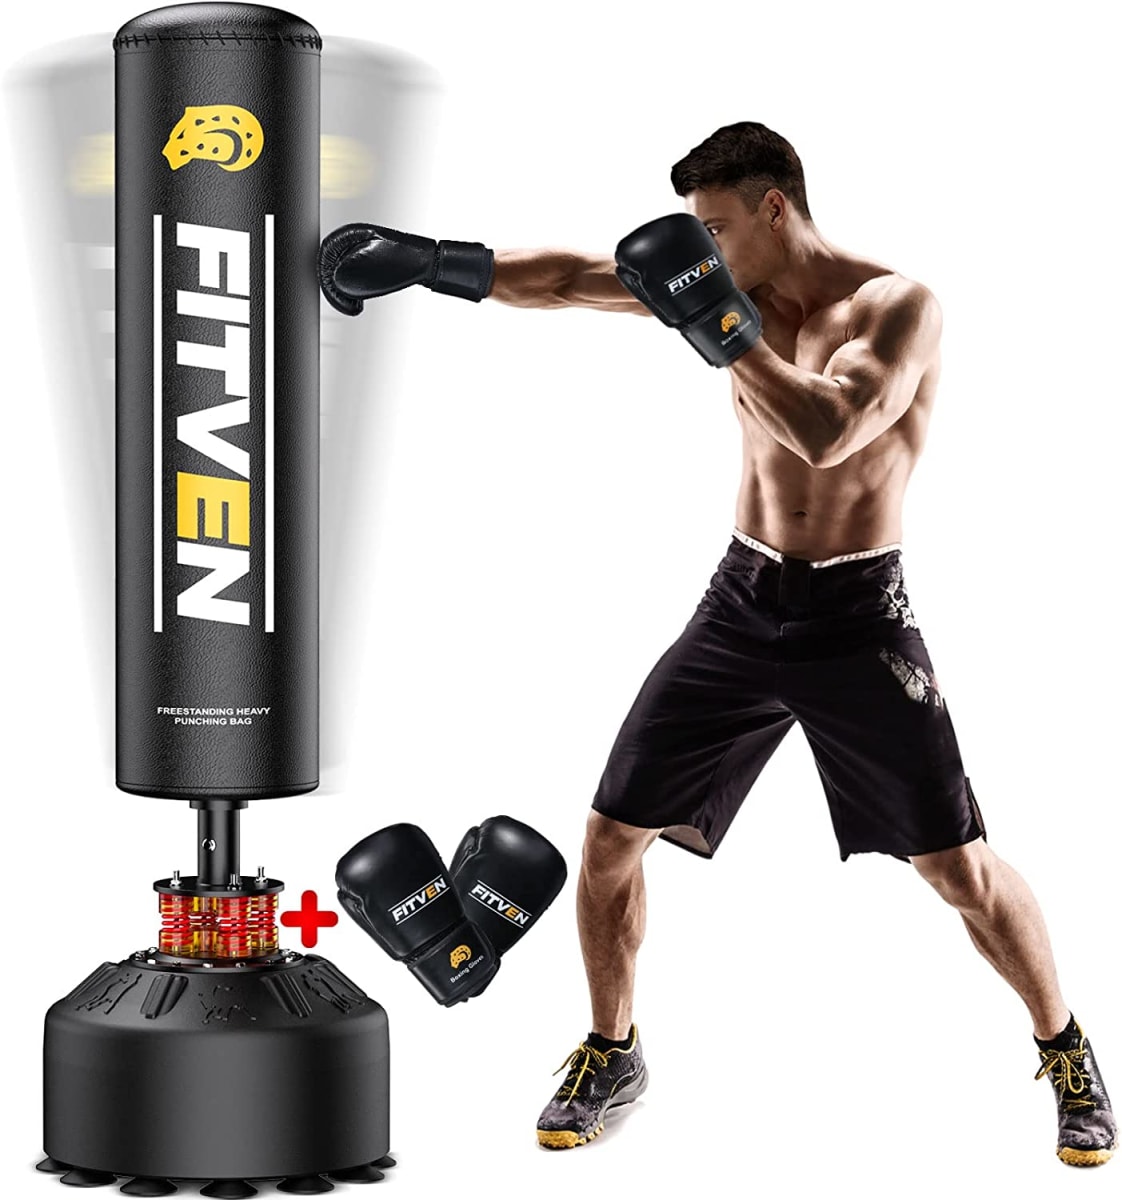 Freestanding Punching Bag 70''-205lbs with Boxing Gloves Heavy Boxing Bag with Suction Cup Base for Adult Youth Kids - Men Stand Kickboxing Bag for Home Office